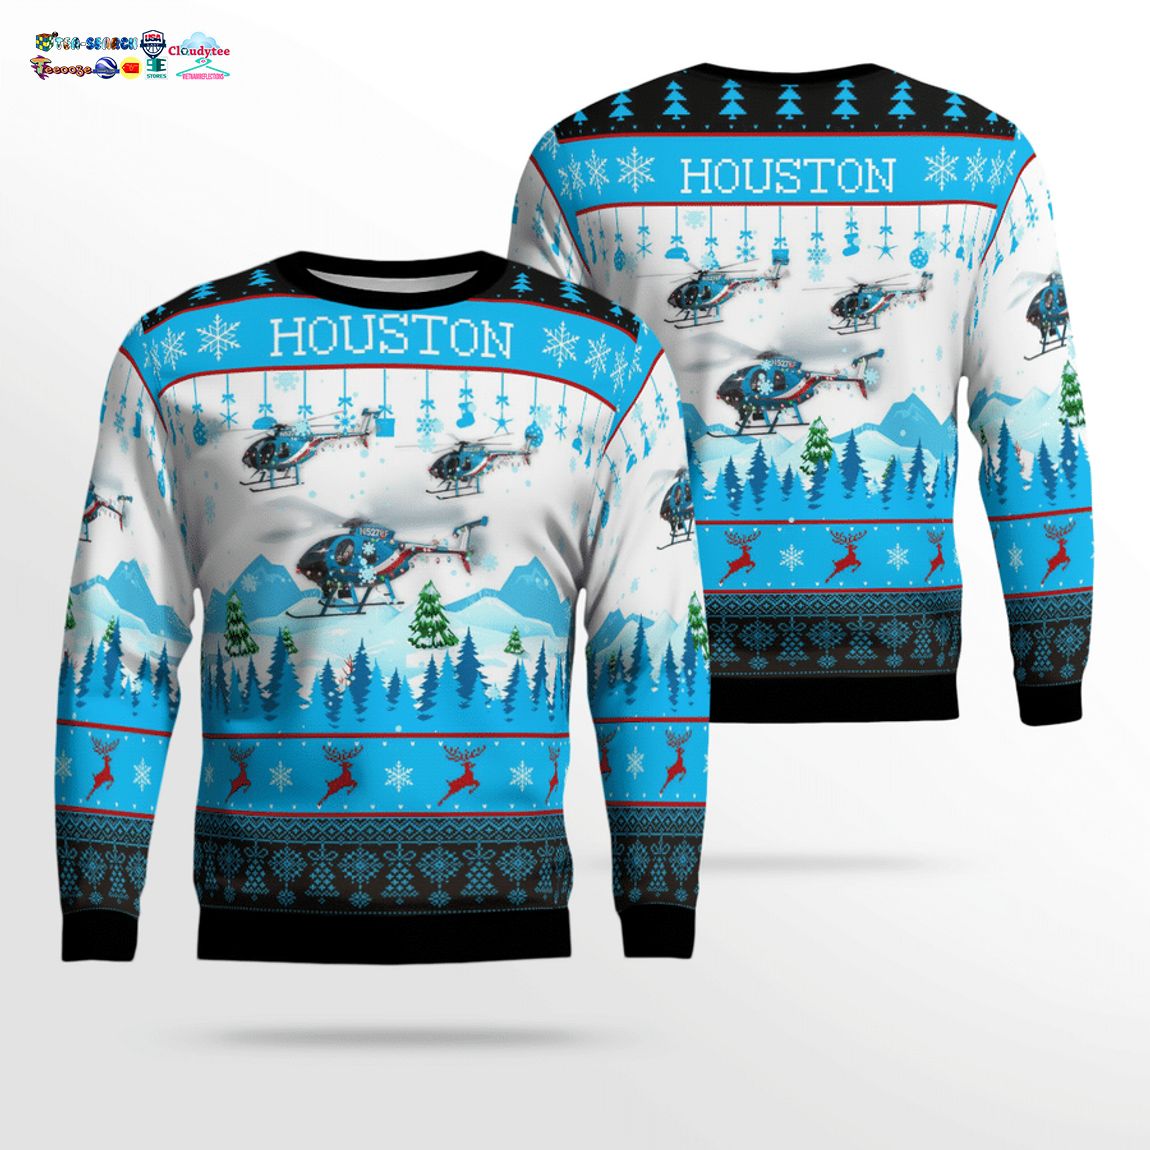 Houston Police Helicopter 78F N5278F 3D Christmas Sweater – Saleoff